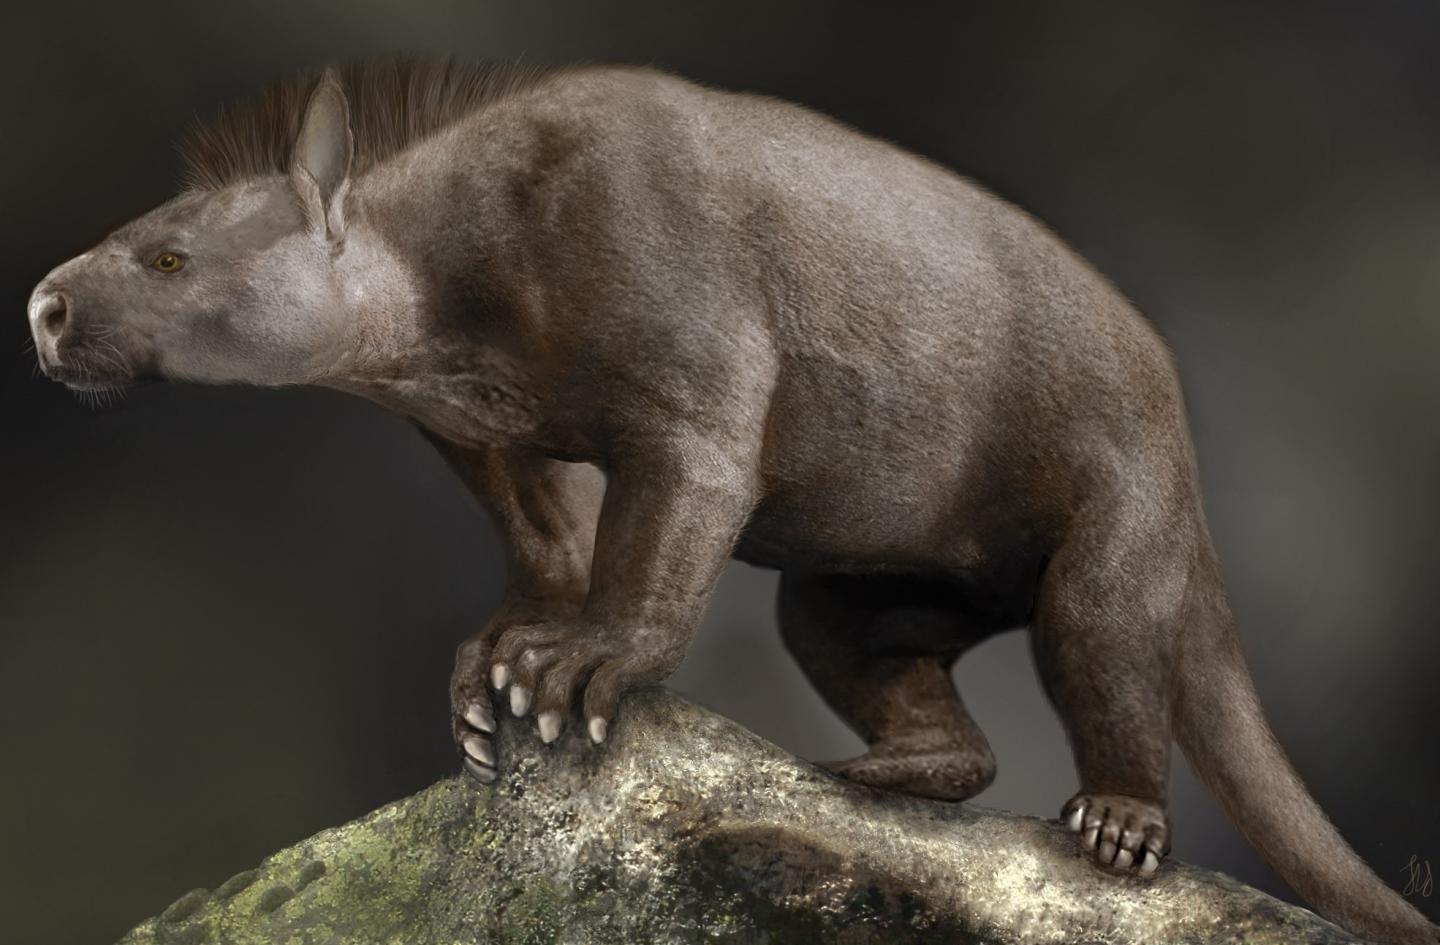 Reconstruction of a Paleocene periptychid condylarth, an ungulate-like mammal that lived around 65 million years ago